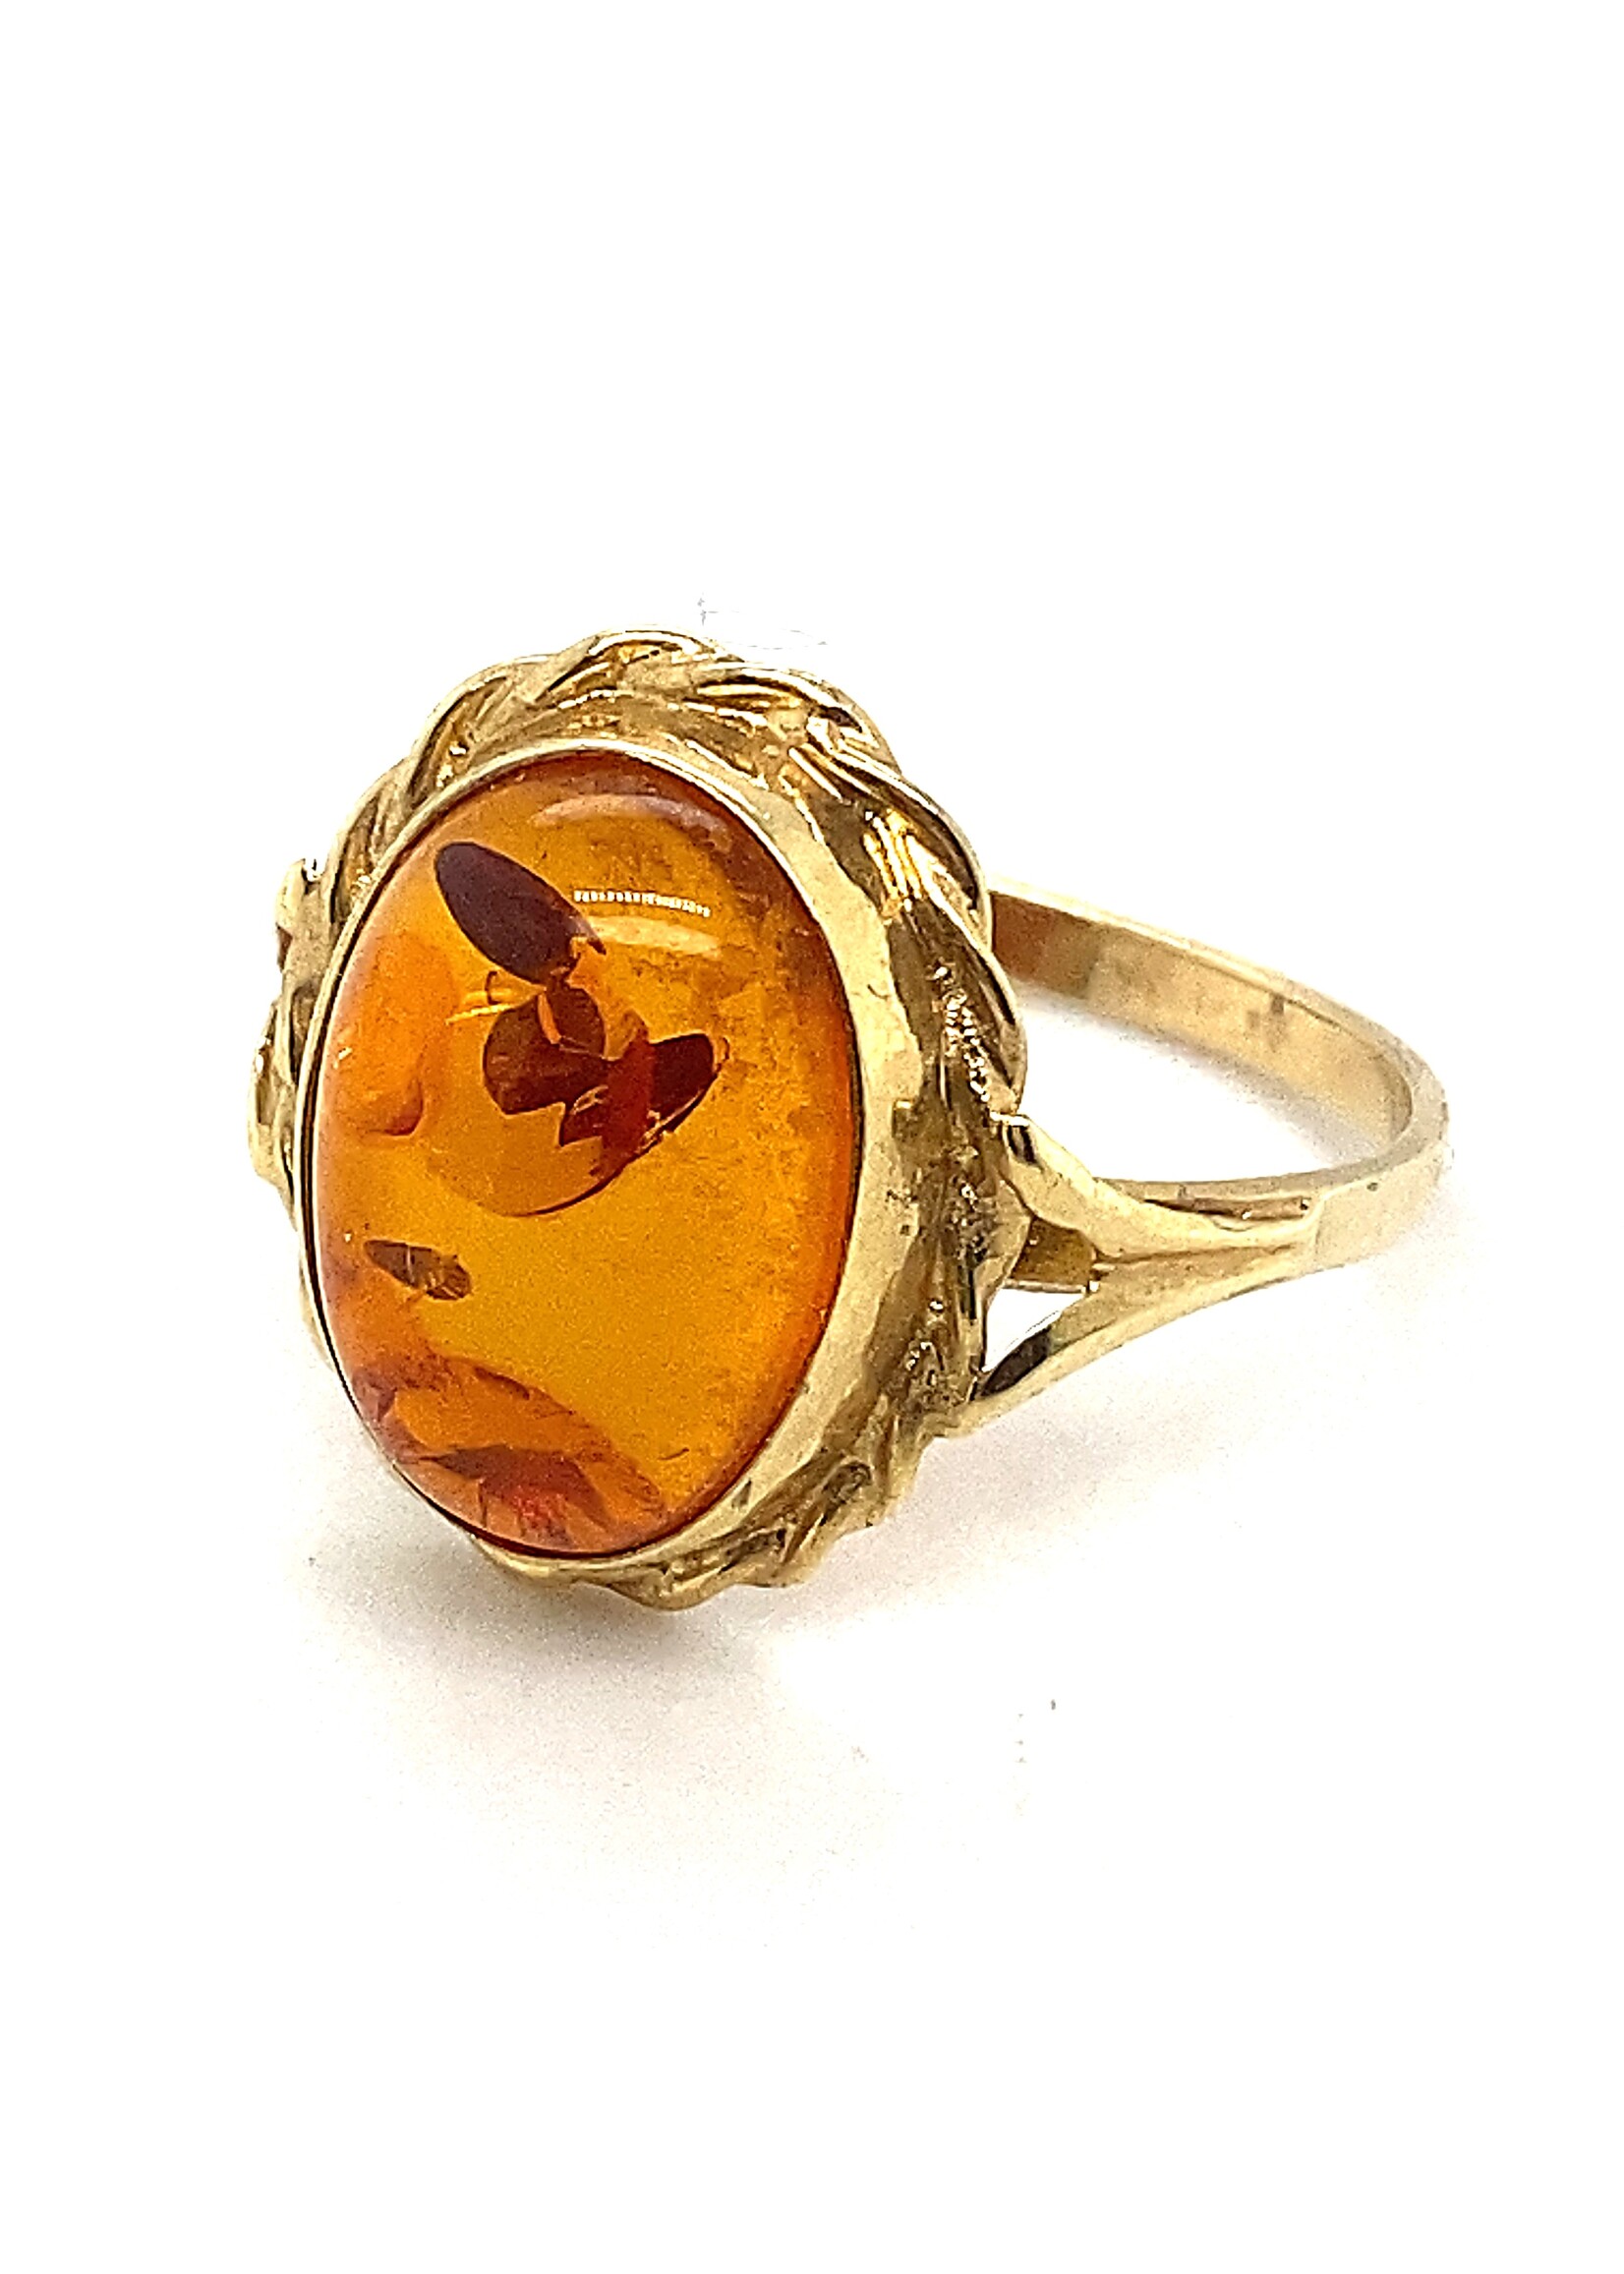 Vintage & Occasion Occasion ring met Amber / barnsteen